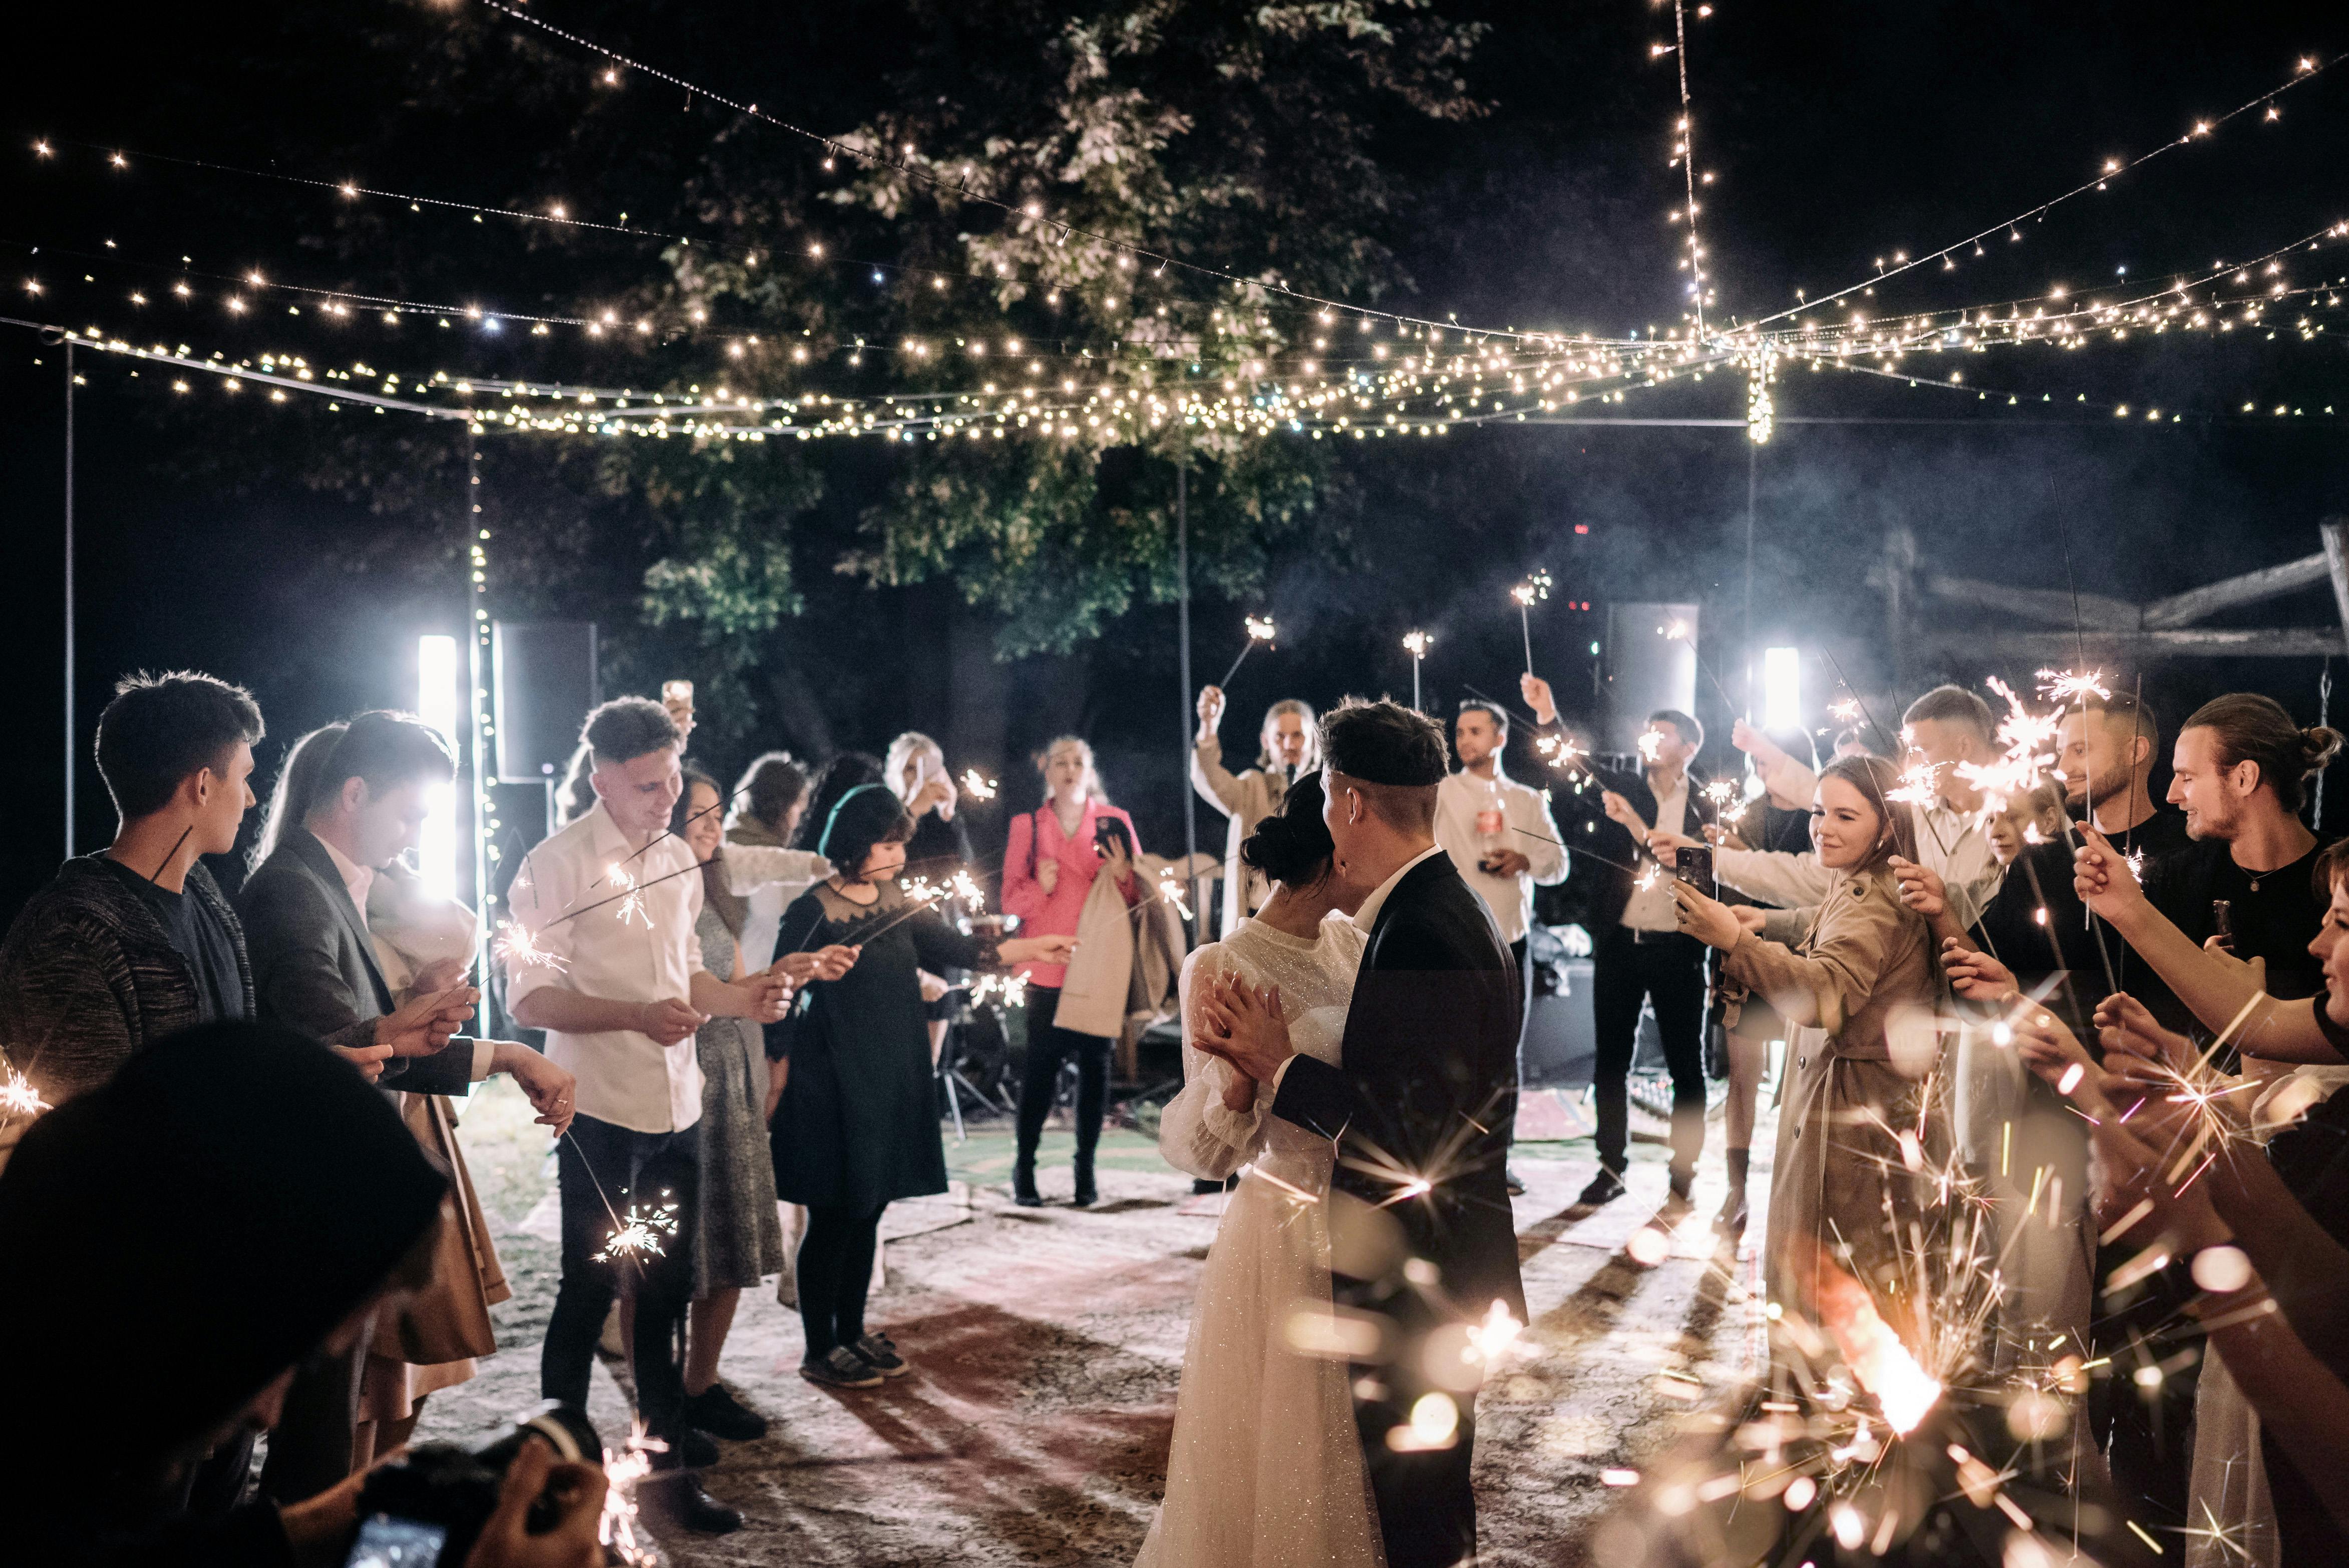 Wedding guests dance the night away with the bridal couple | Source: Pexels